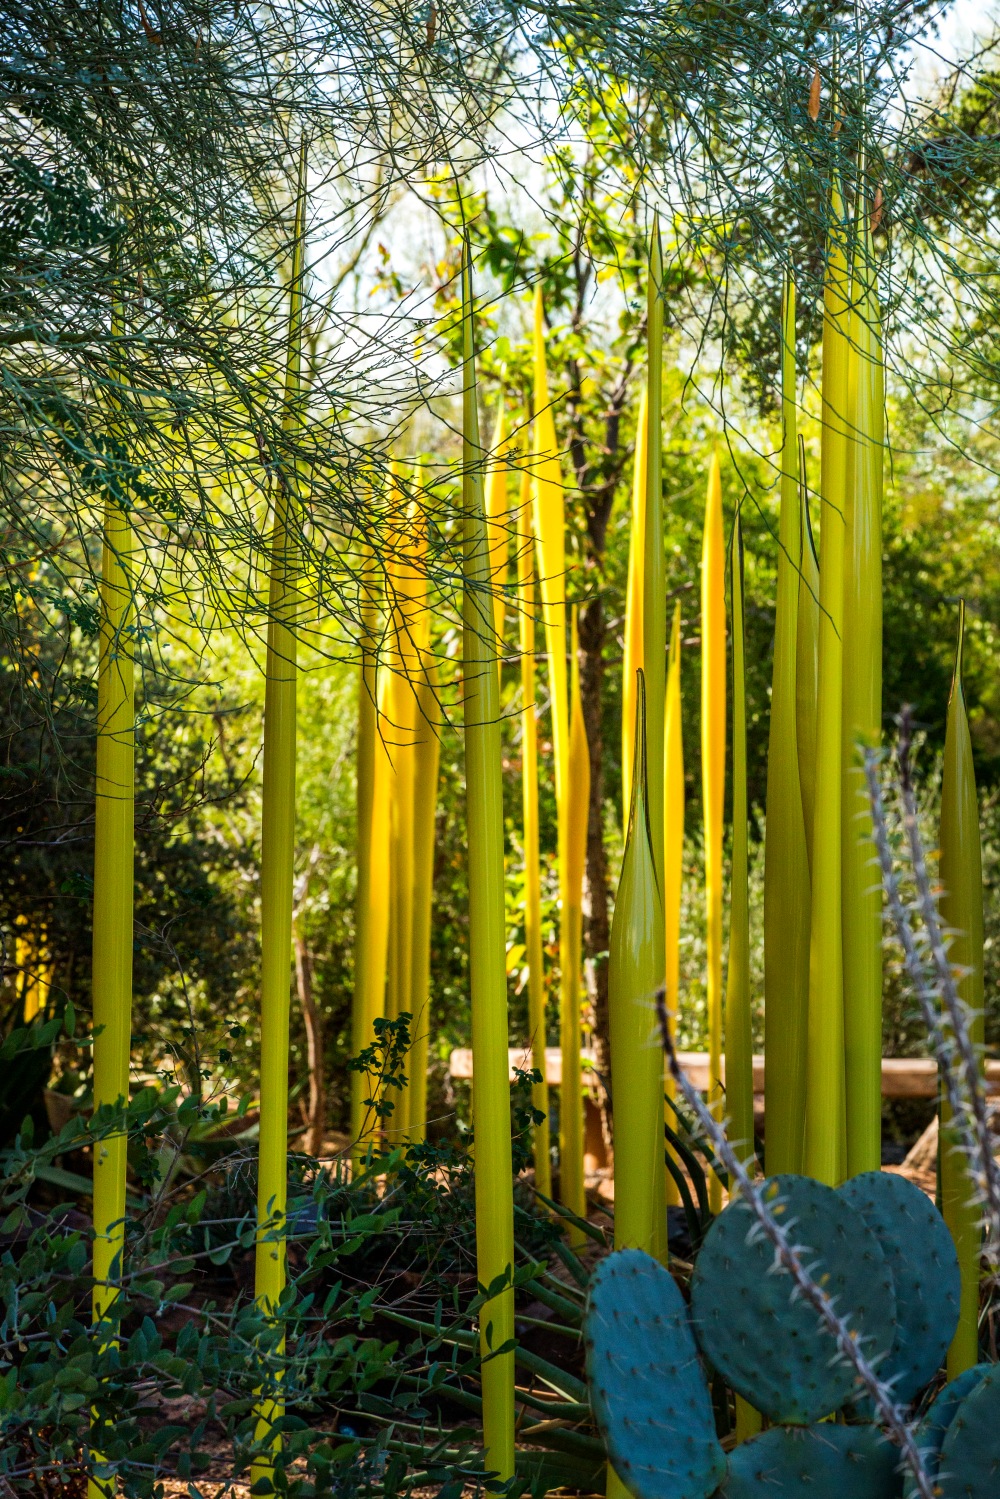 Dale Chihuly, Yellow Reeds, 2013